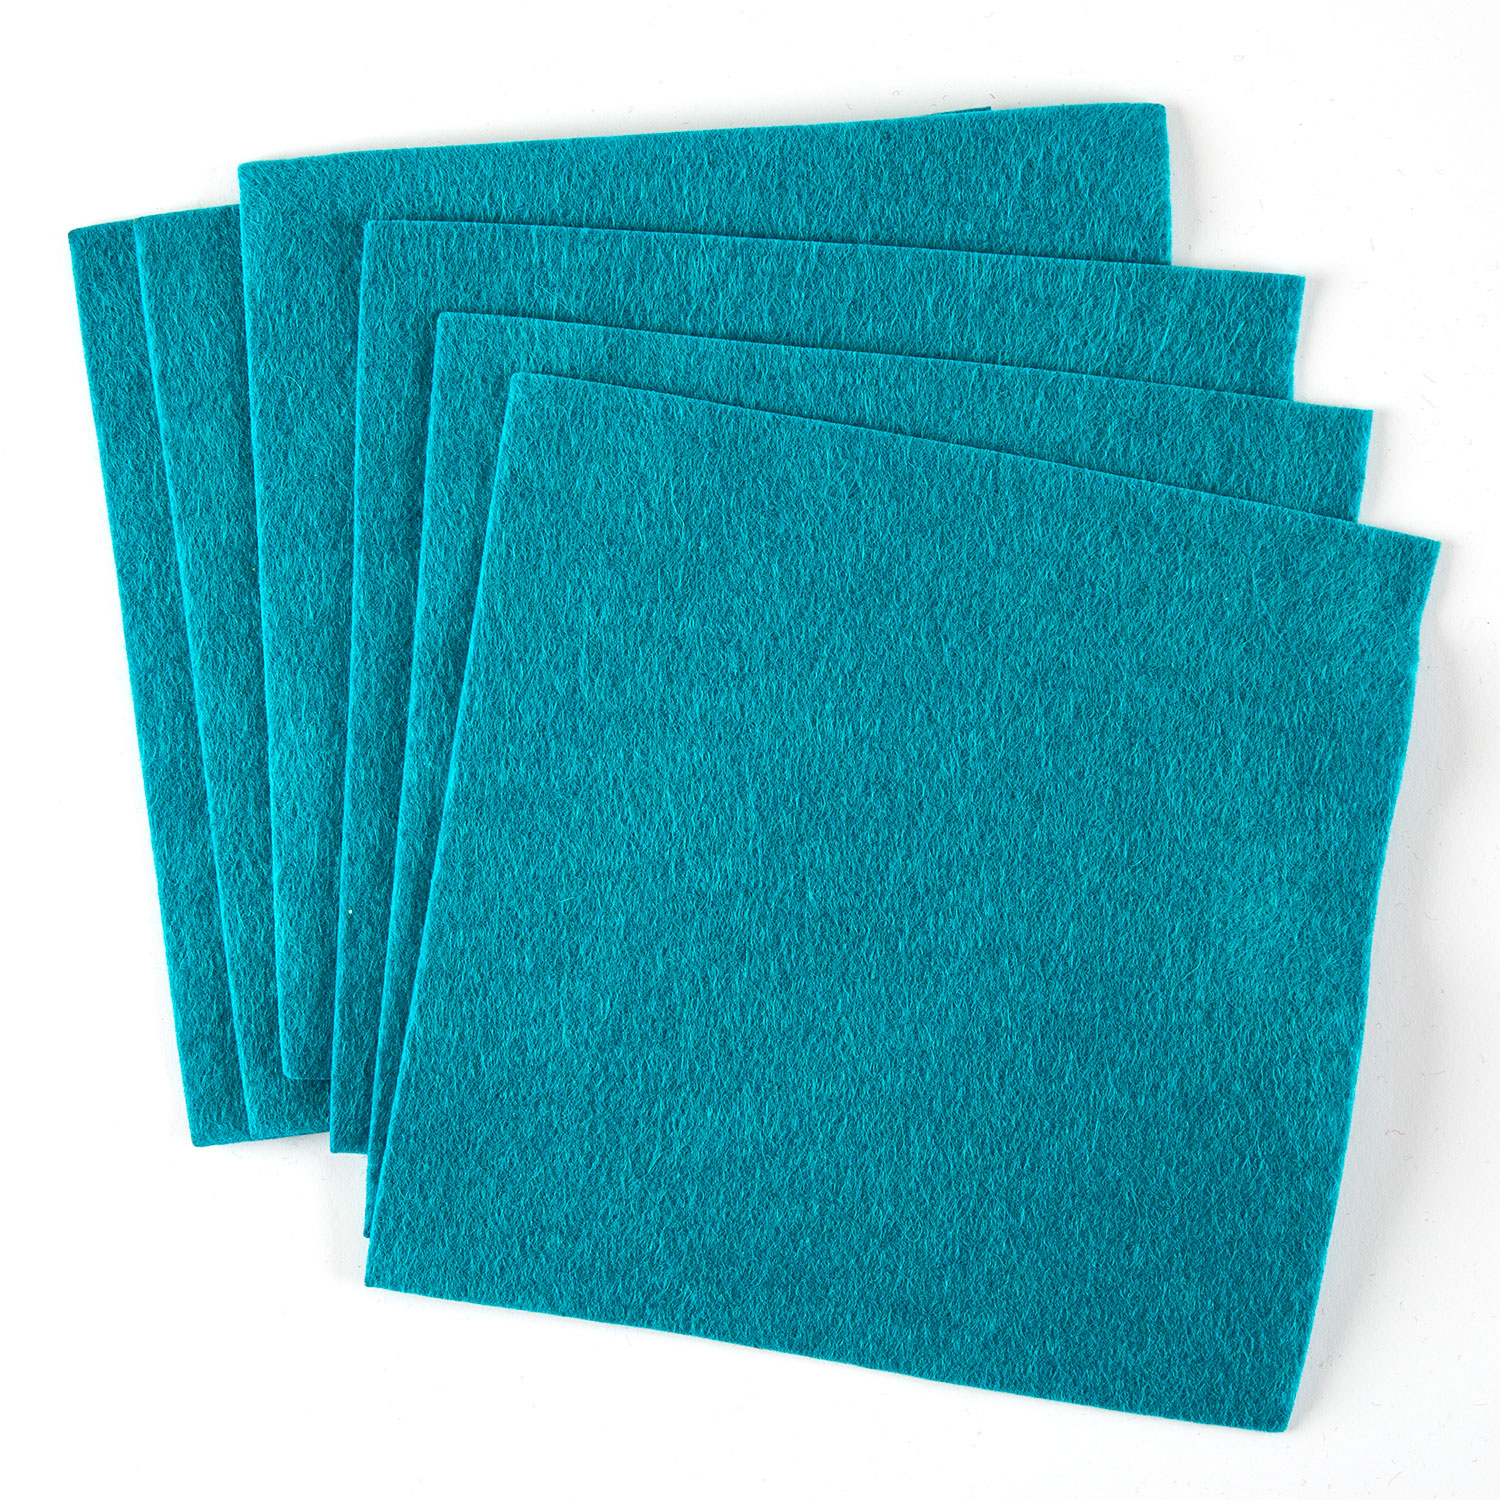 Felt by Clarity Pack of 6 Tile Backers 6x6" Non Adhesive Felt Pick N Mix - Pick any 2 - Carribean